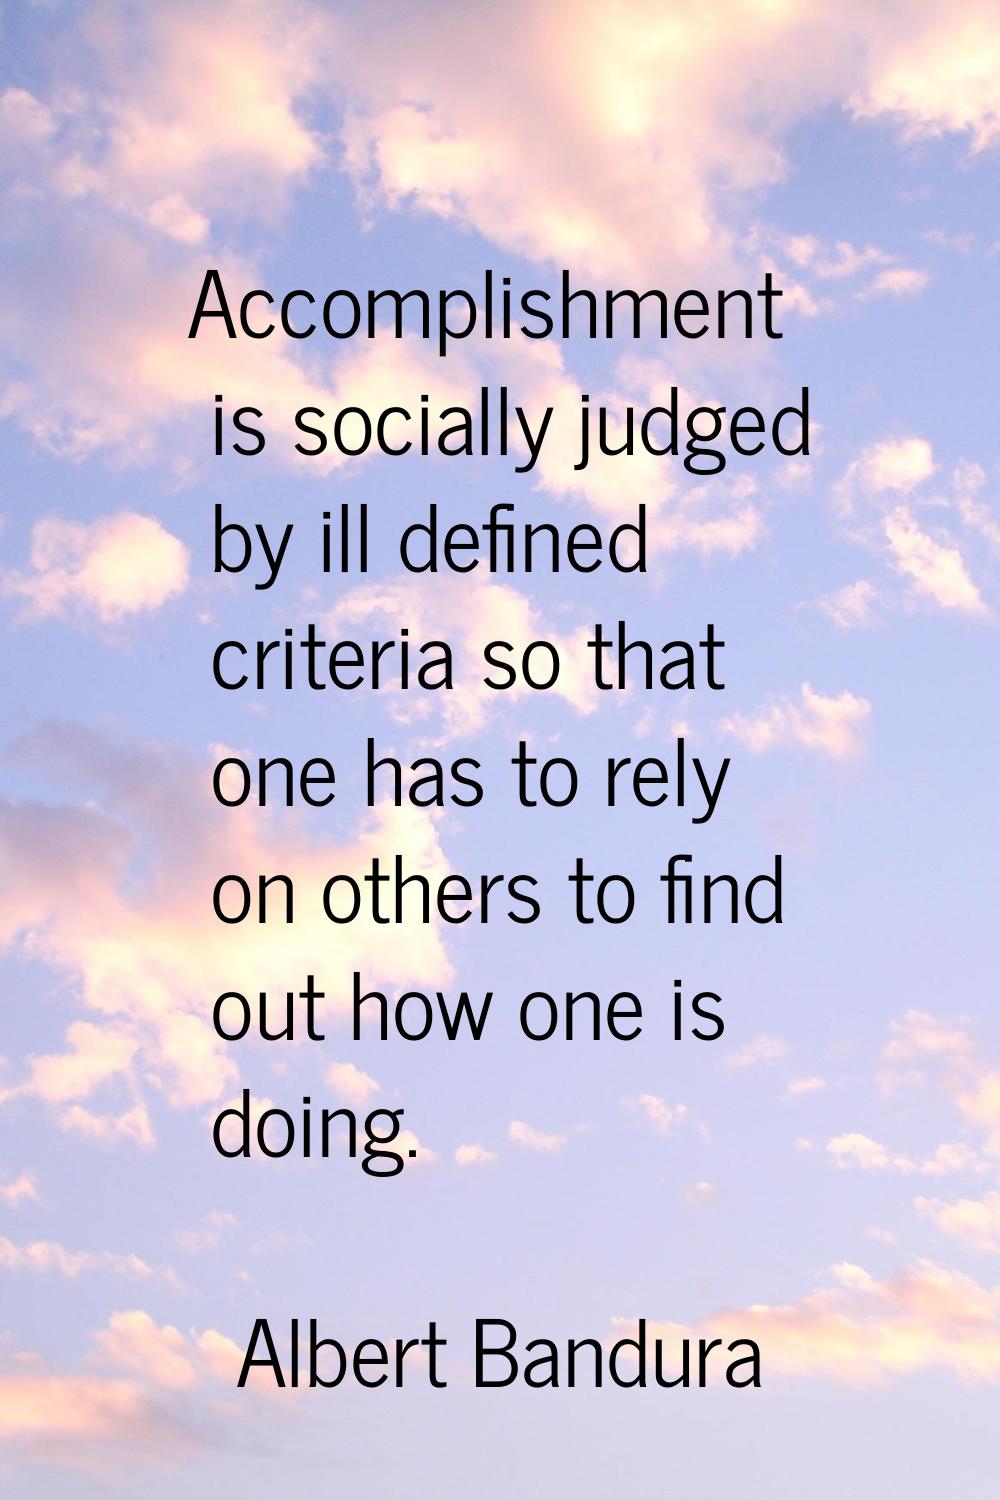 Accomplishment is socially judged by ill defined criteria so that one has to rely on others to find